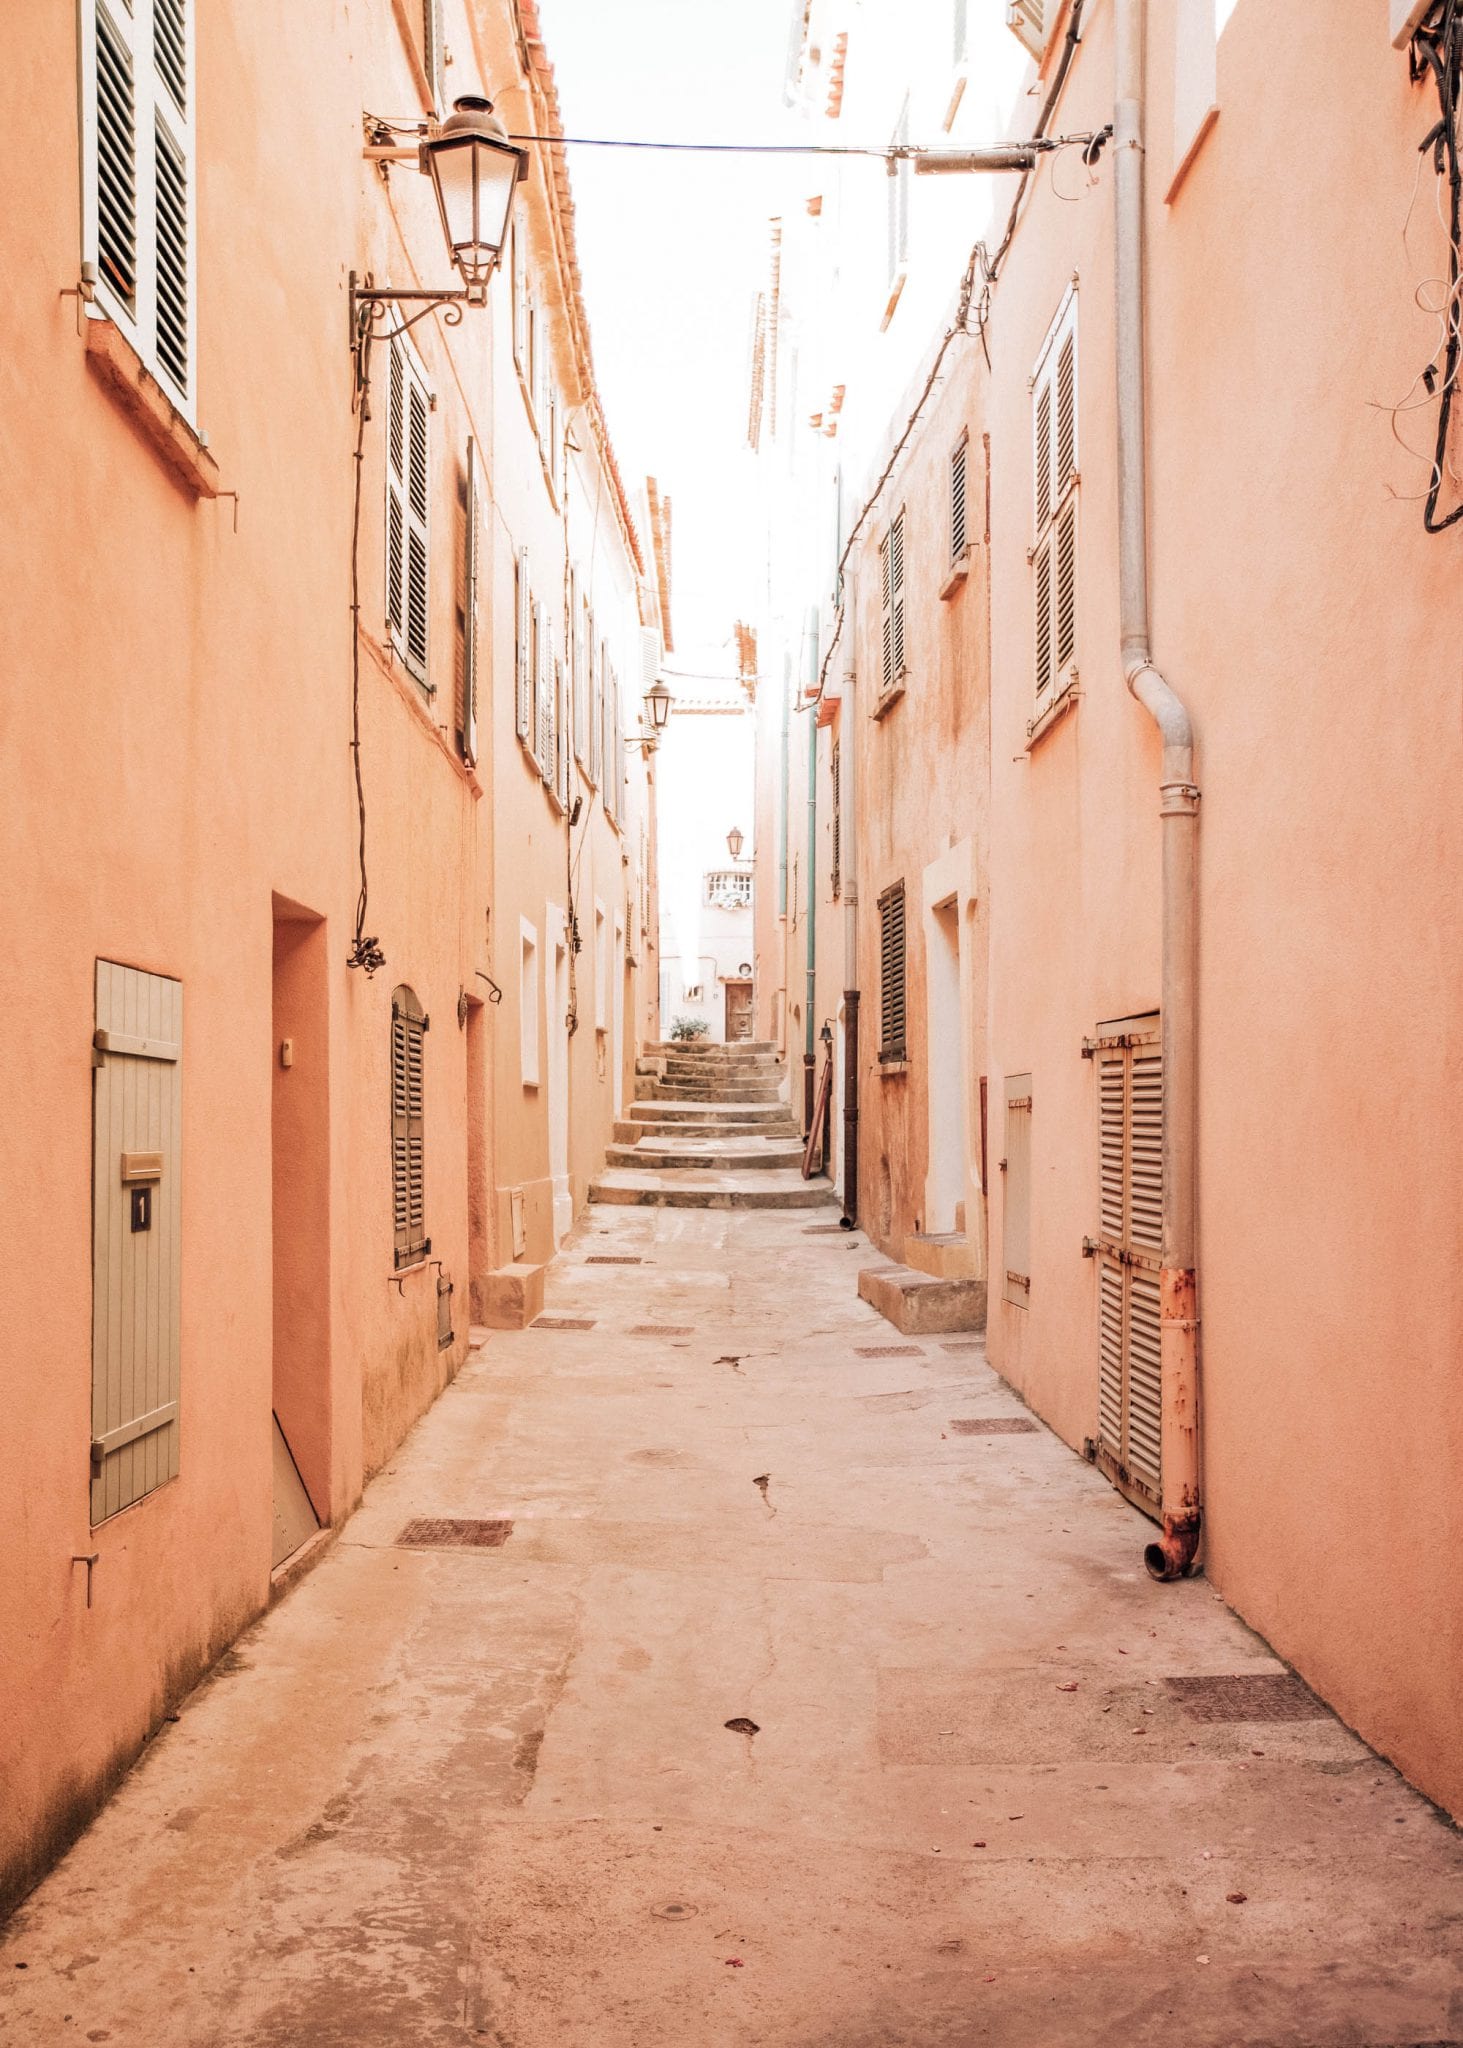 South of France Travel Diary - PART 1 in St. Tropez, Grimaud and Gassin